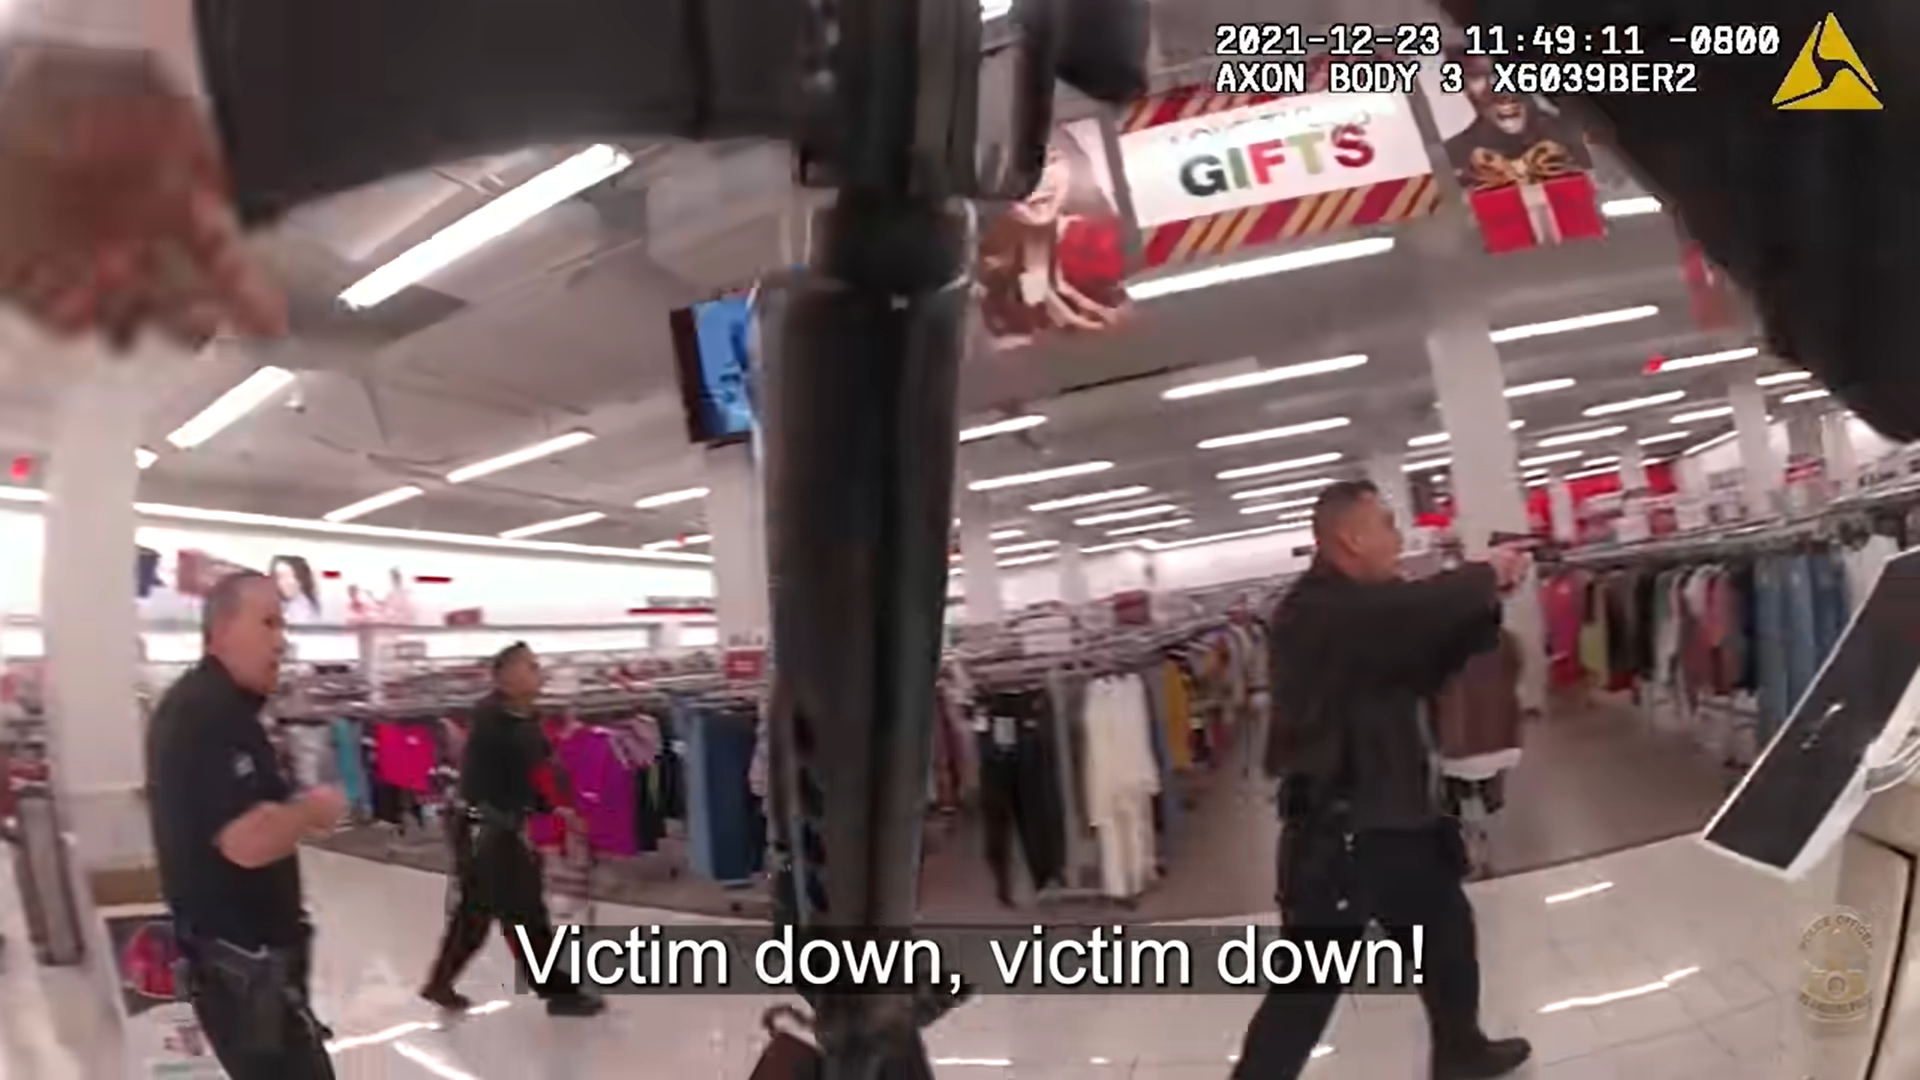 Camera footage of Officers beginning to move toward Daniel Elena Lopez in a store